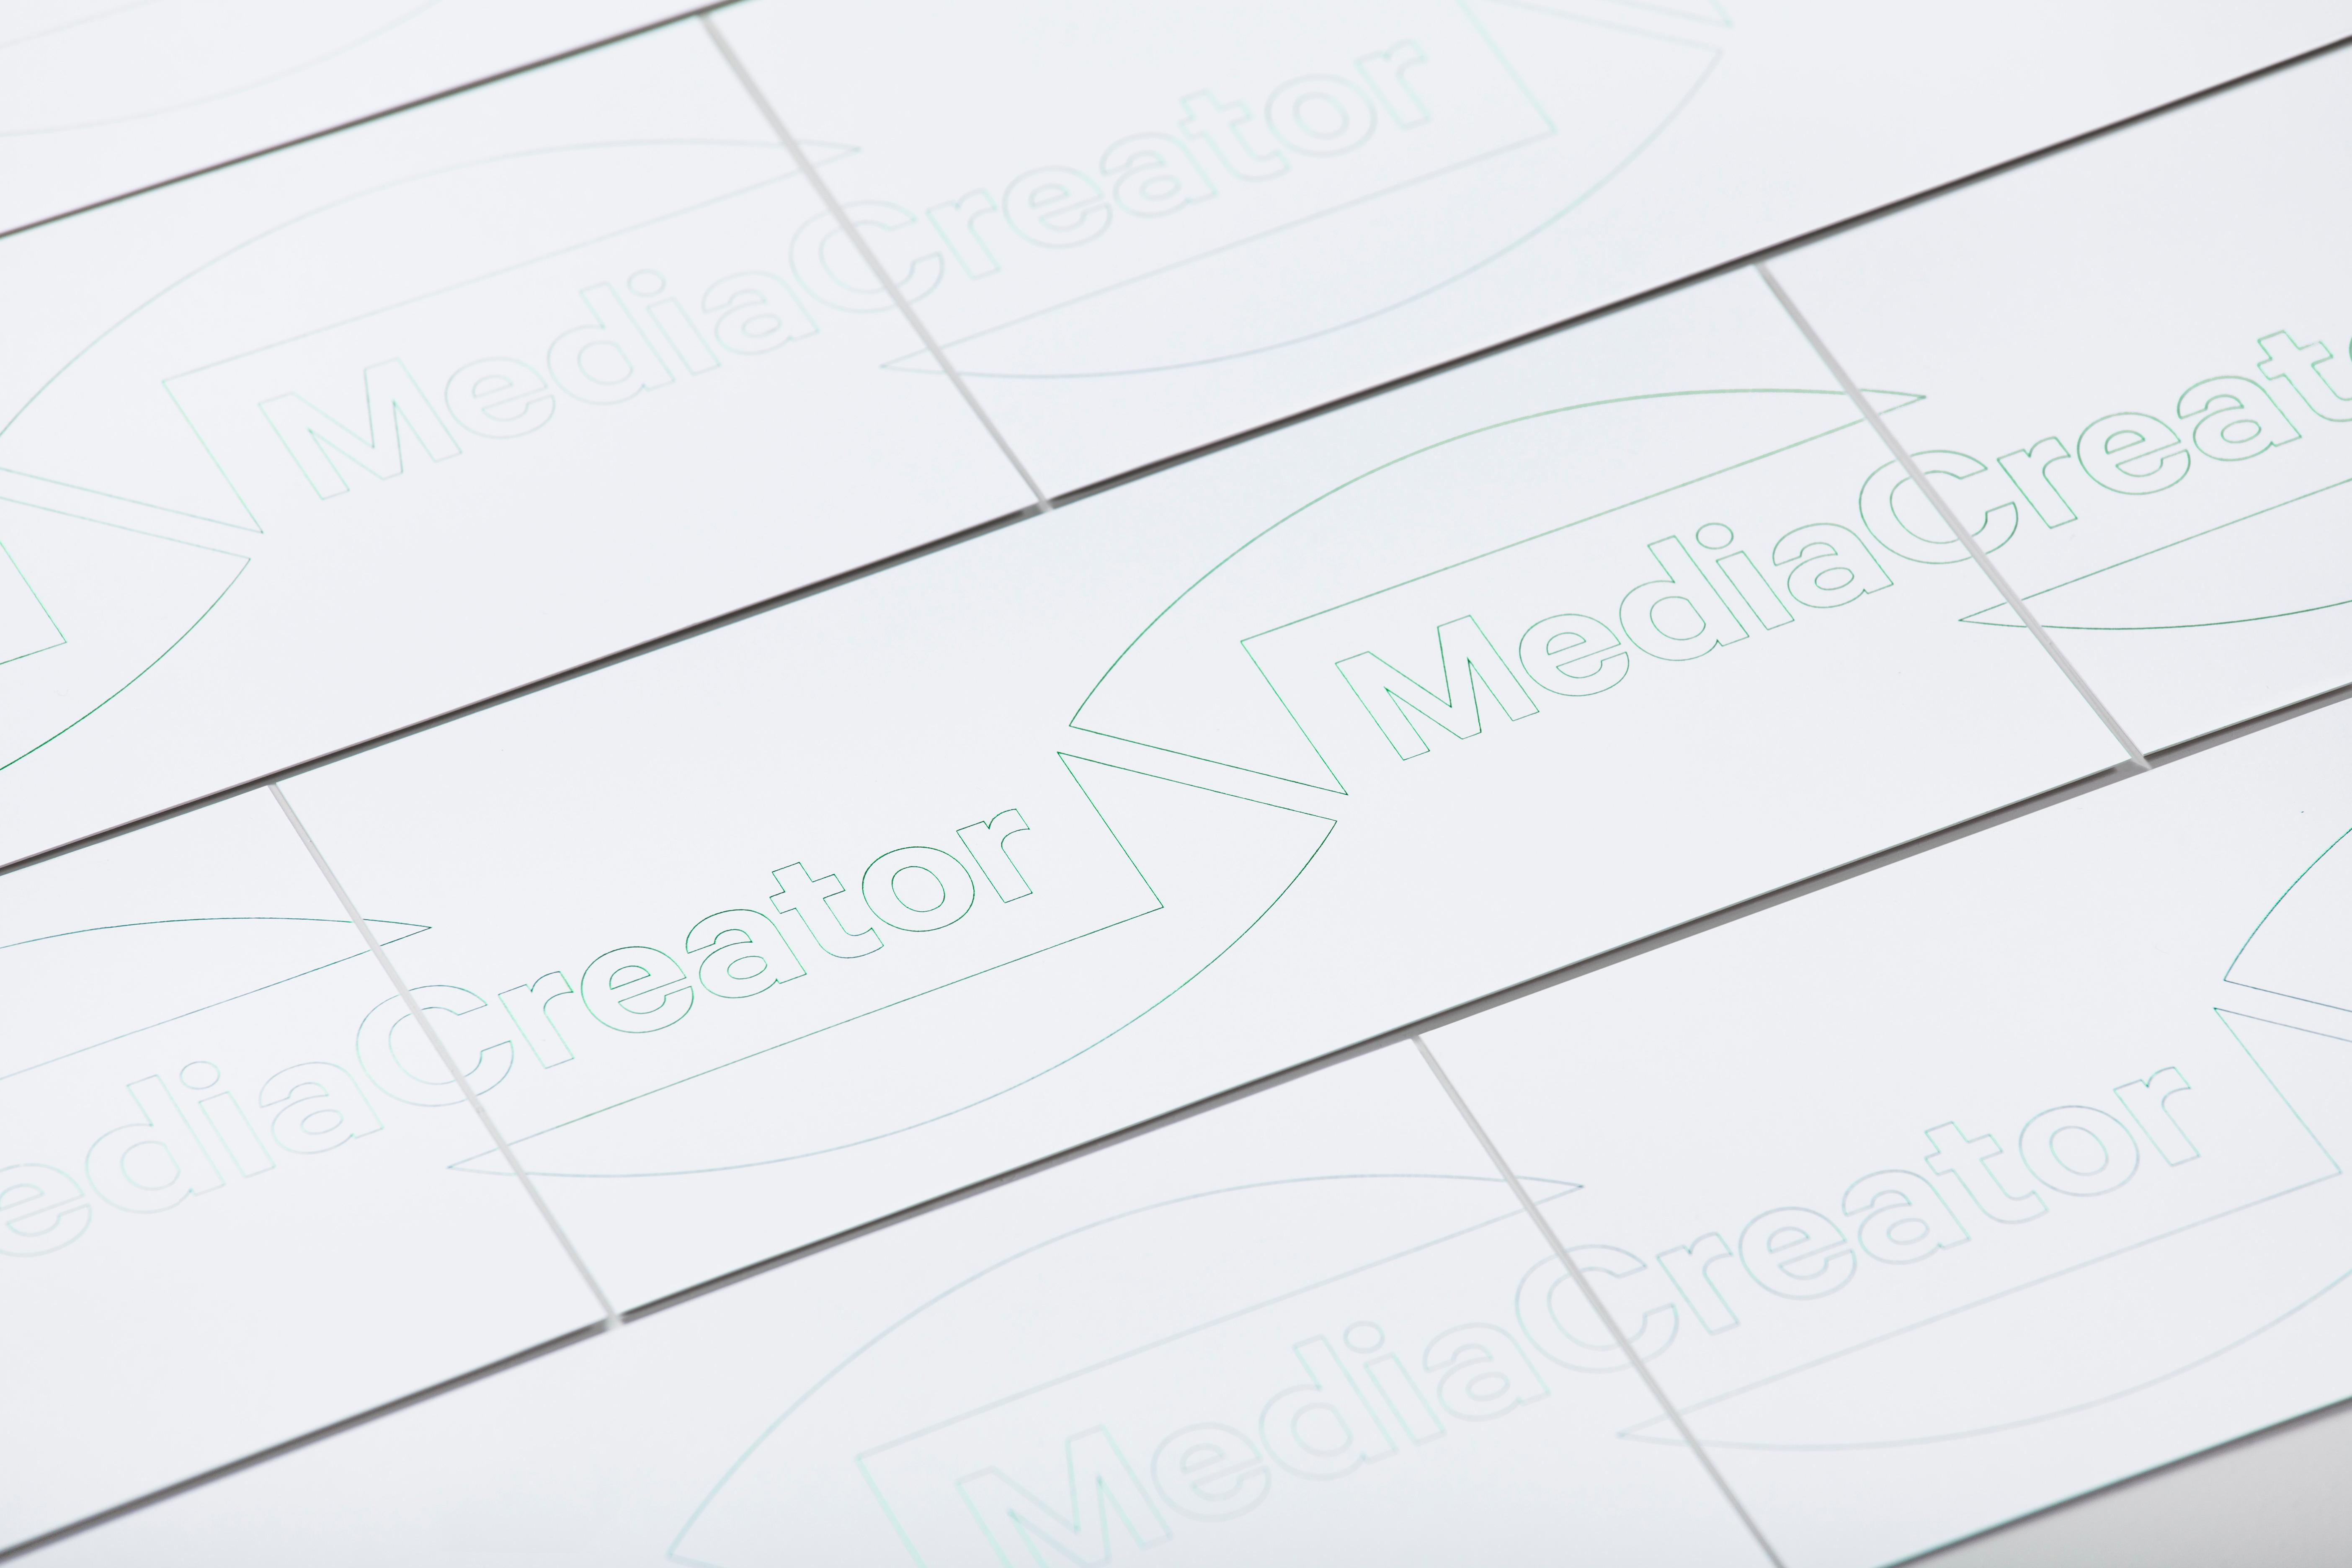 Logo and correspondence cards with green fluorescent ink detail designed by Lundgren+Lindqvist for Swedish print production and project management company MediaCreator